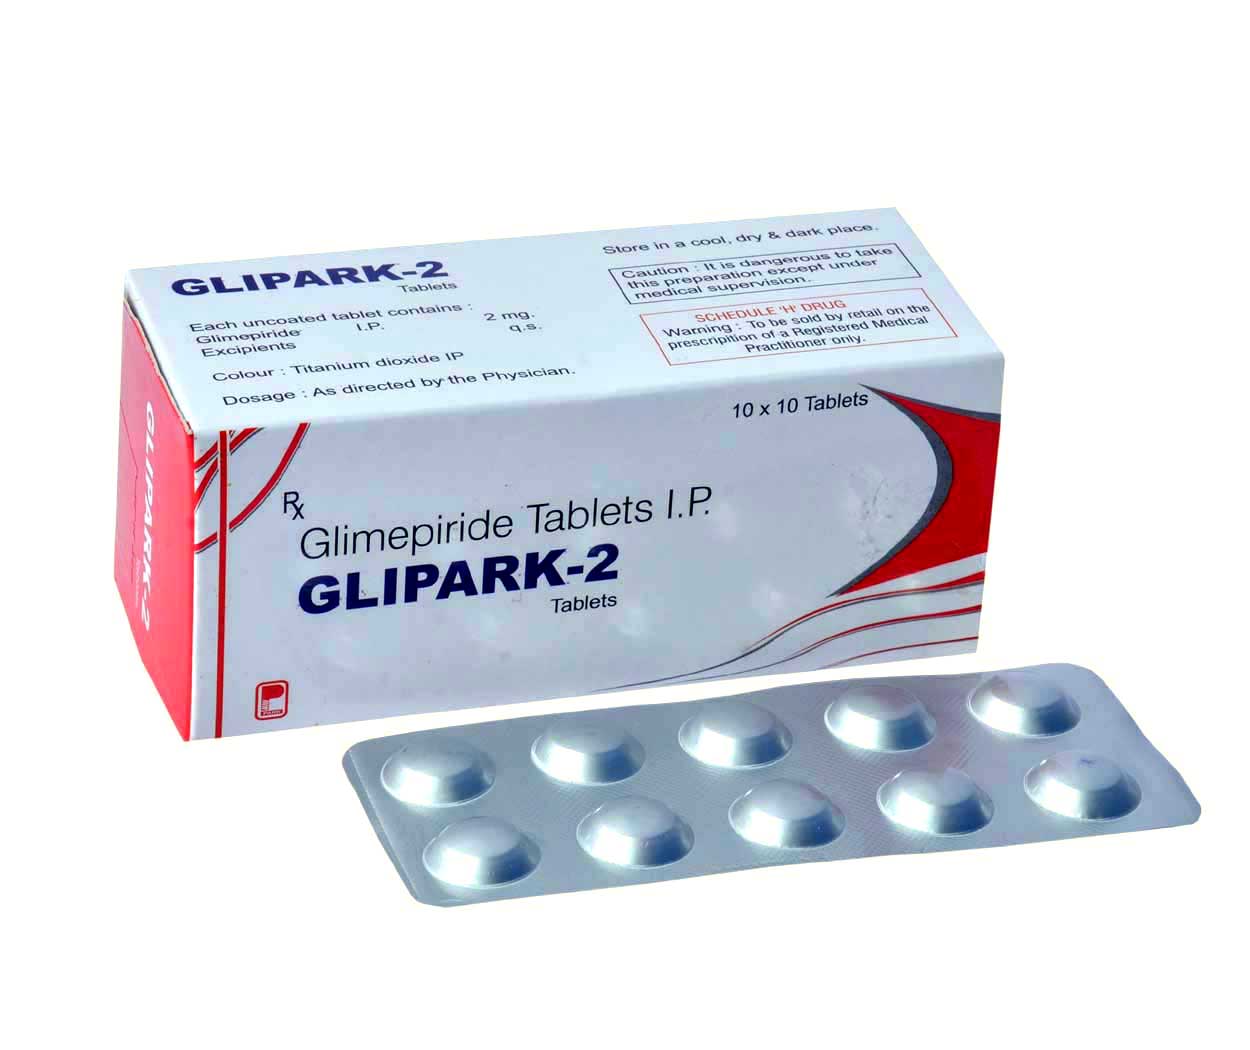 Product Name: GLIPARK 2, Compositions of GLIPARK 2 are Glimepiride Tablets I.P. - Park Pharmaceuticals